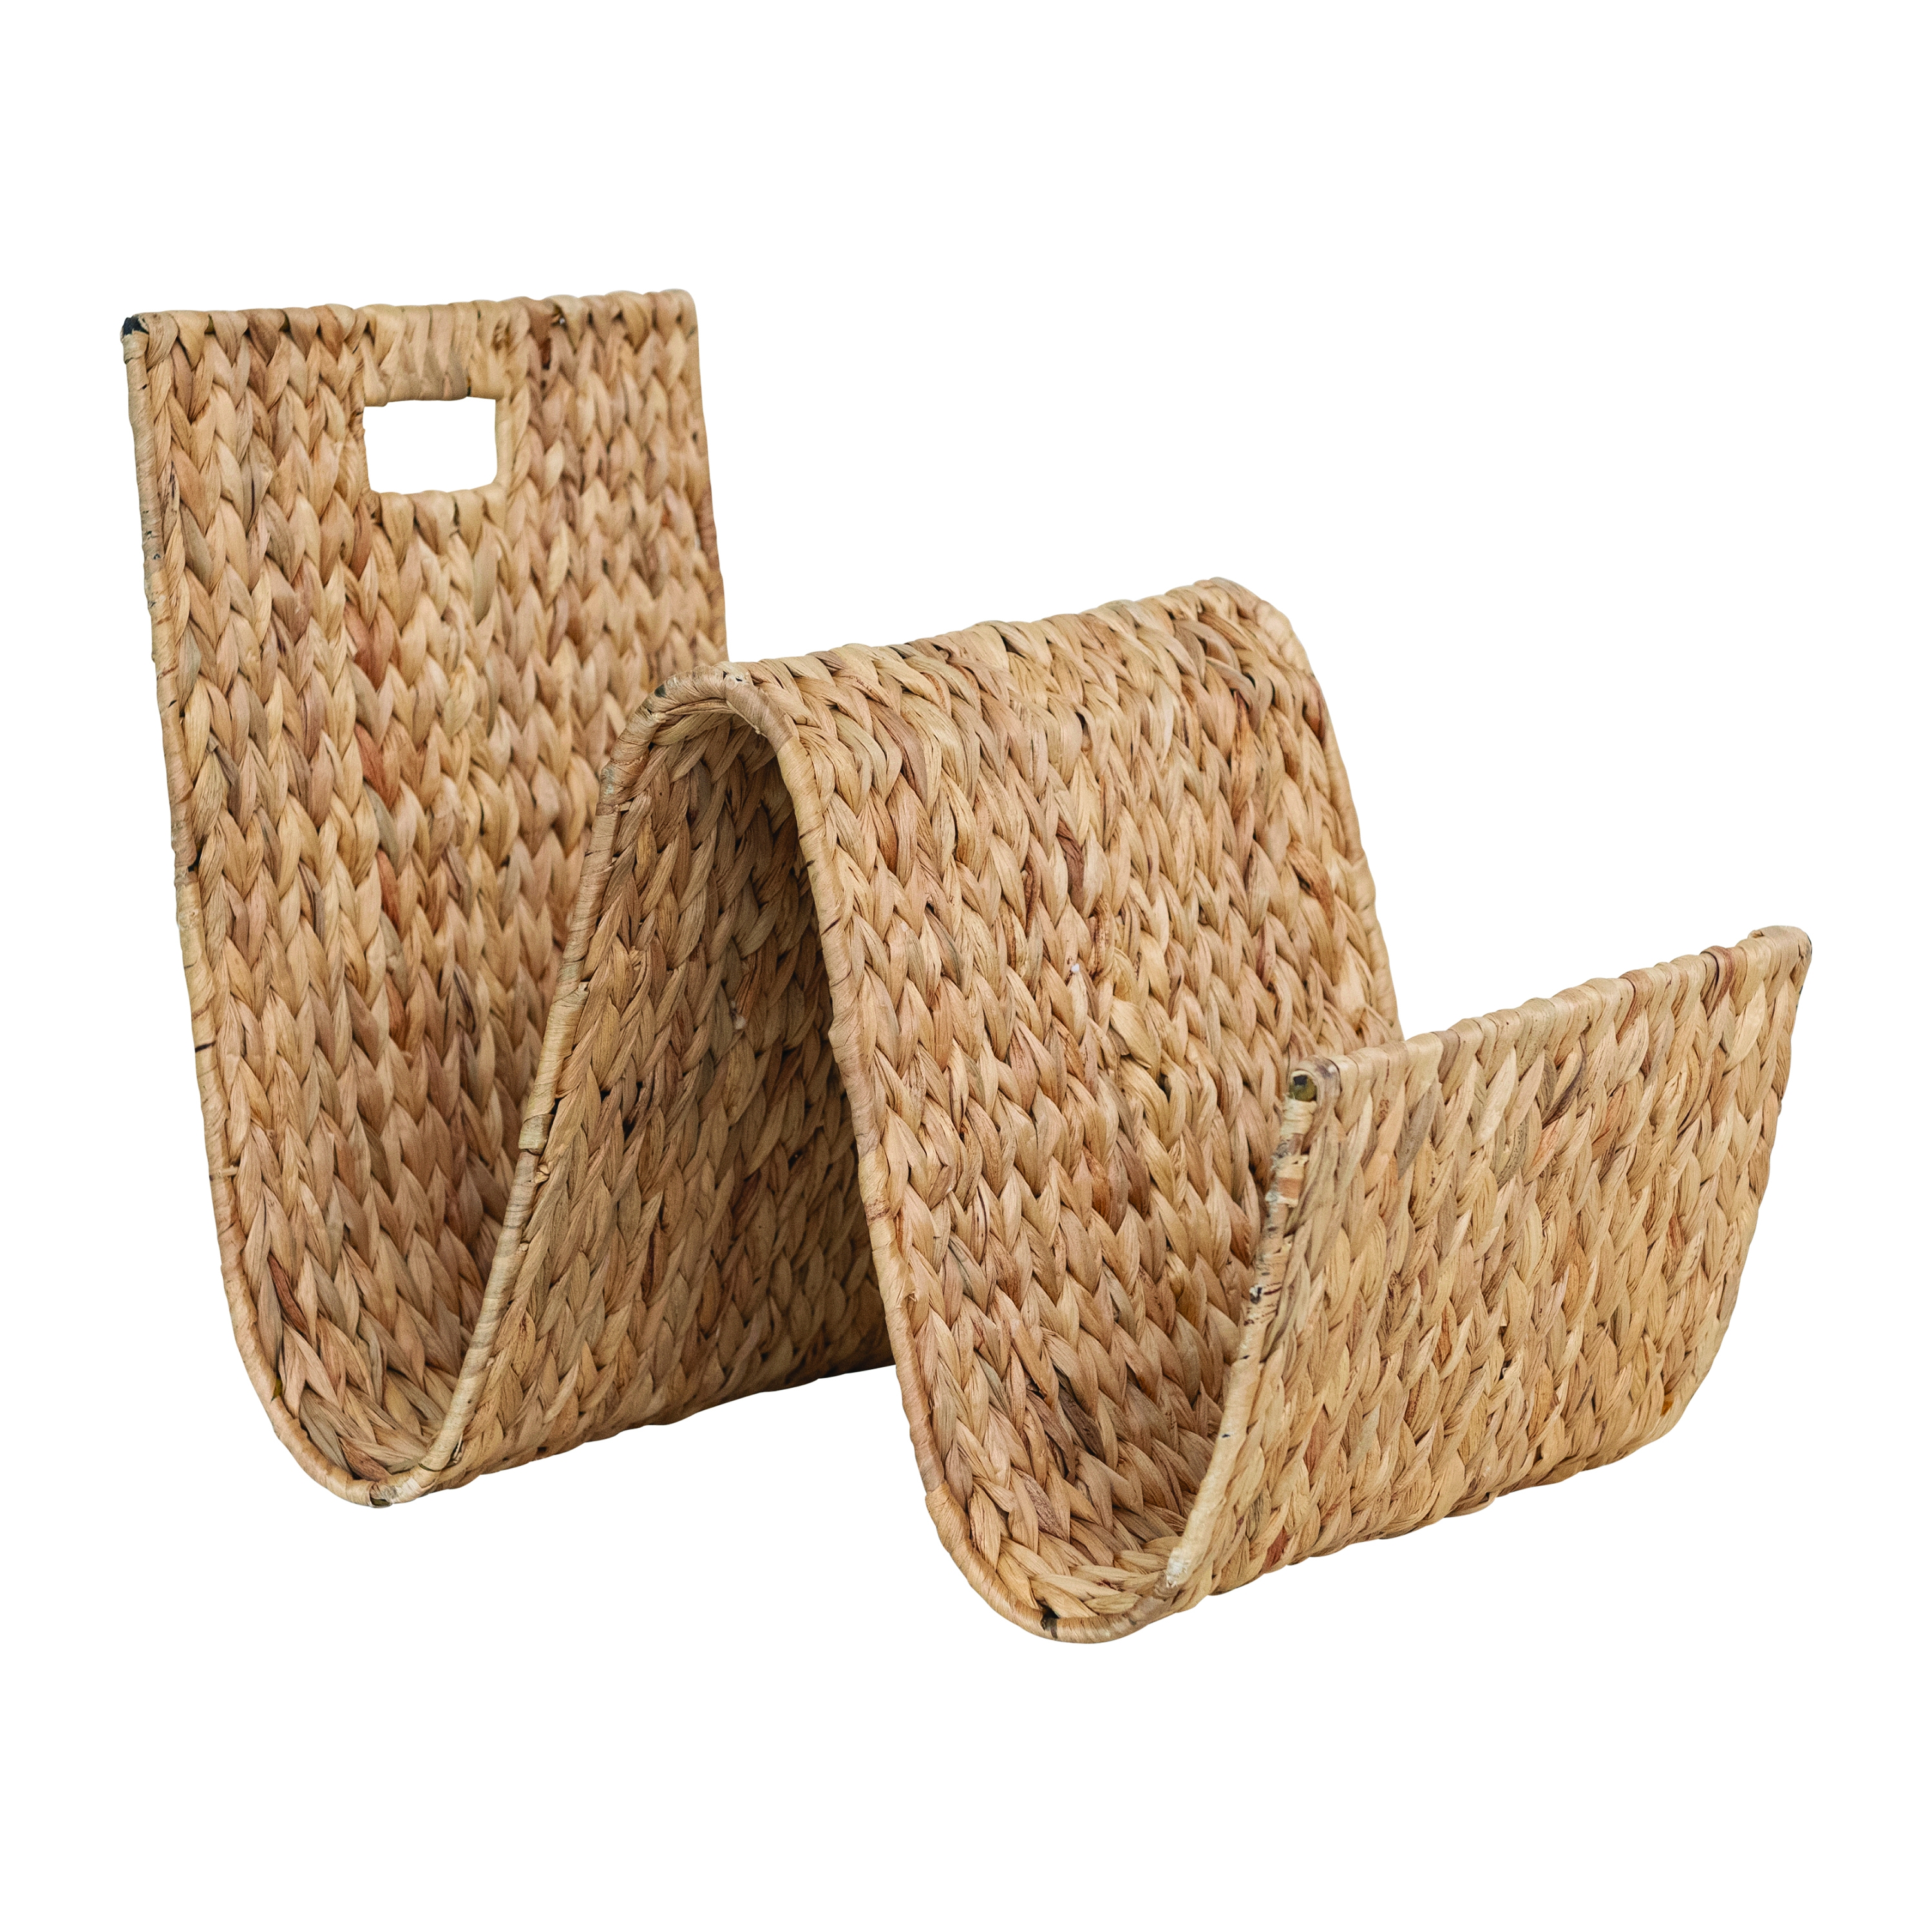 Hand-Woven Water Hyacinth and Metal Magazine Storage Holder with Sturdy Handles, Natural - Image 0